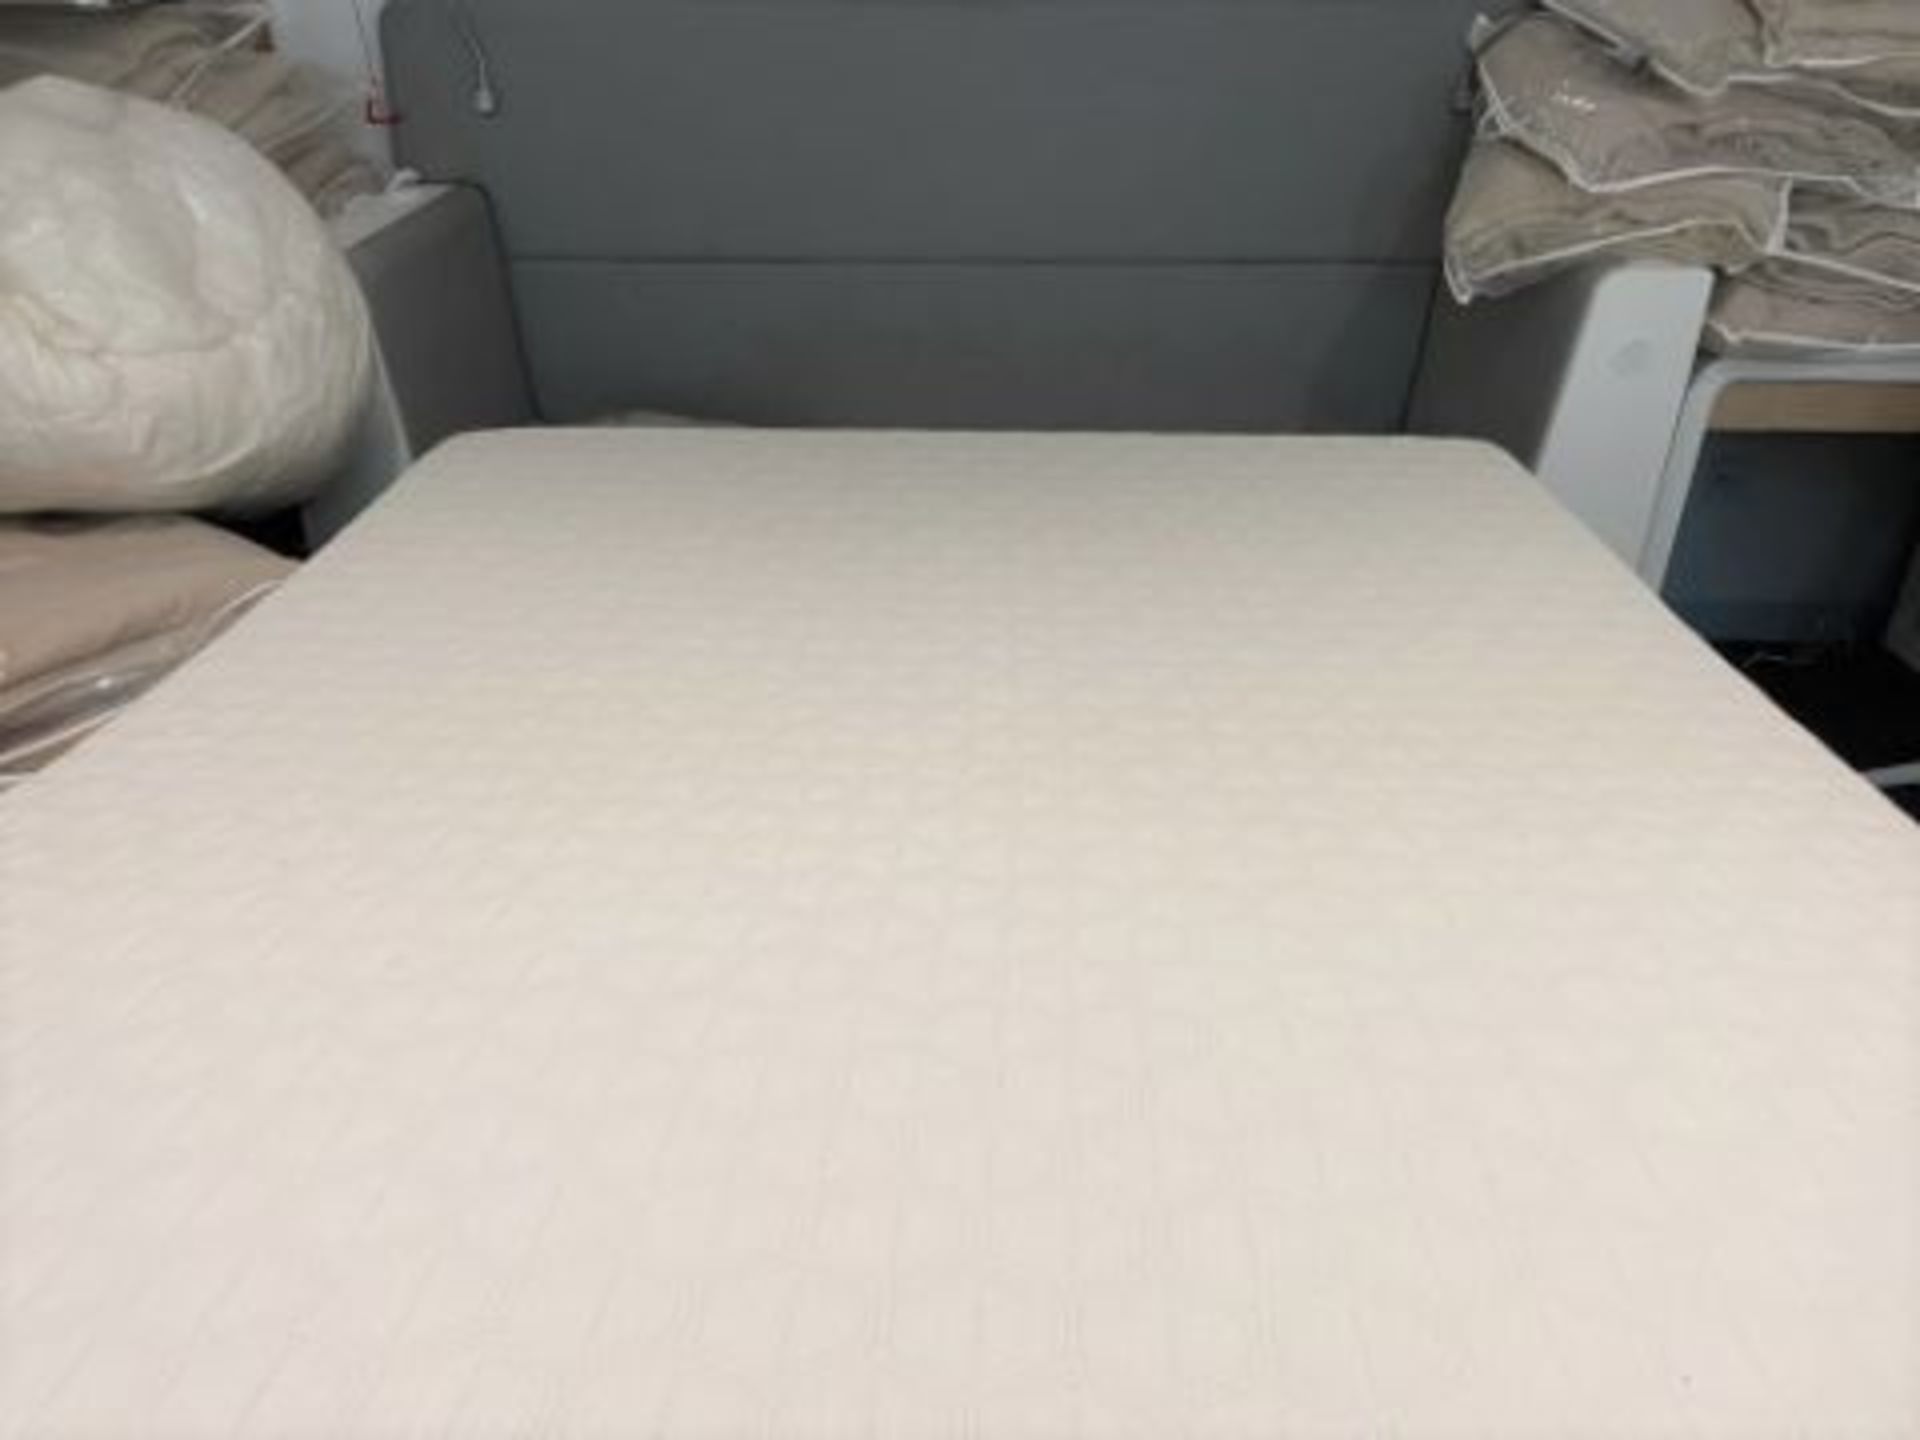 1 x Double Adjustable Space Saving Smart Bed With Serta Motion Memory Foam Mattress - Signature - Image 4 of 12